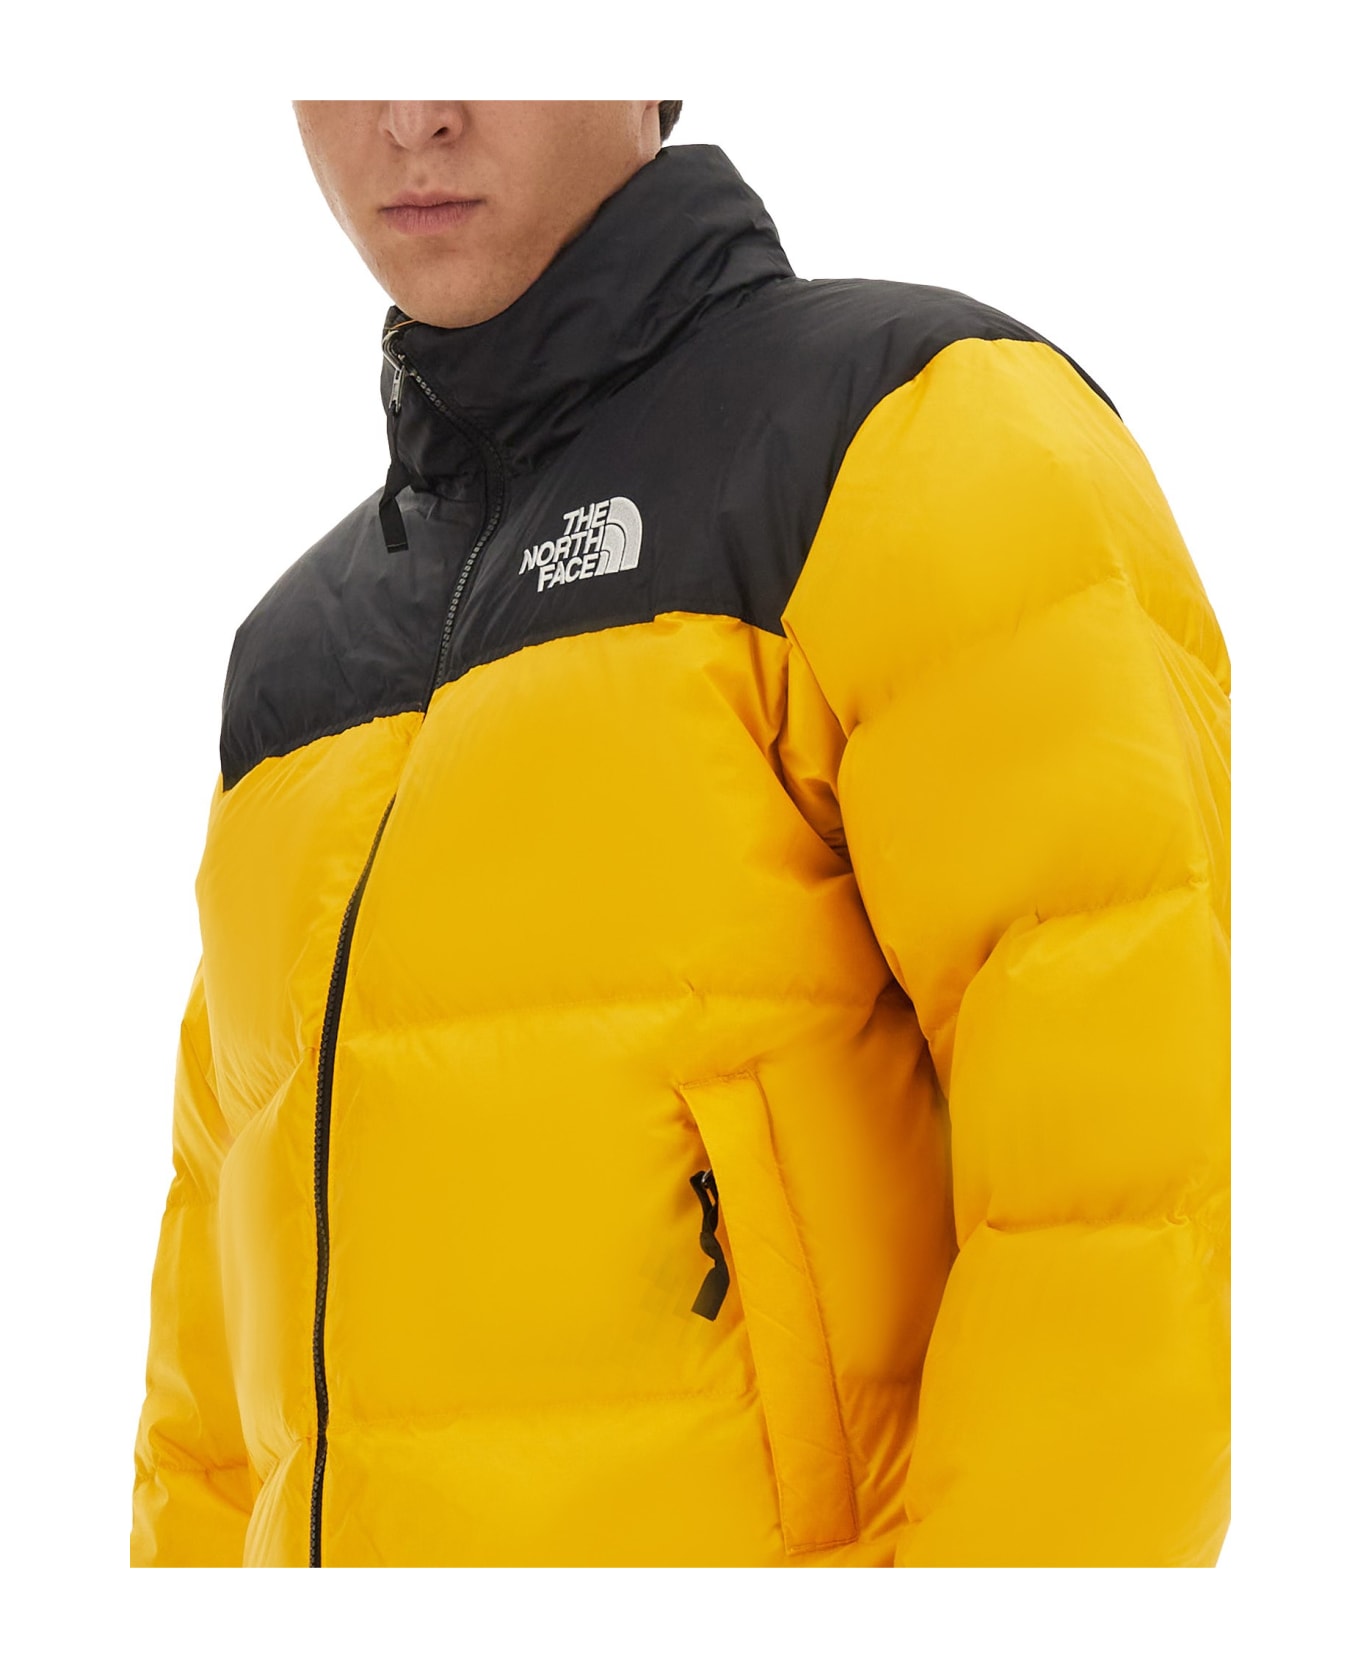 The North Face 1996 Nylon Down Jacket - Gold/black